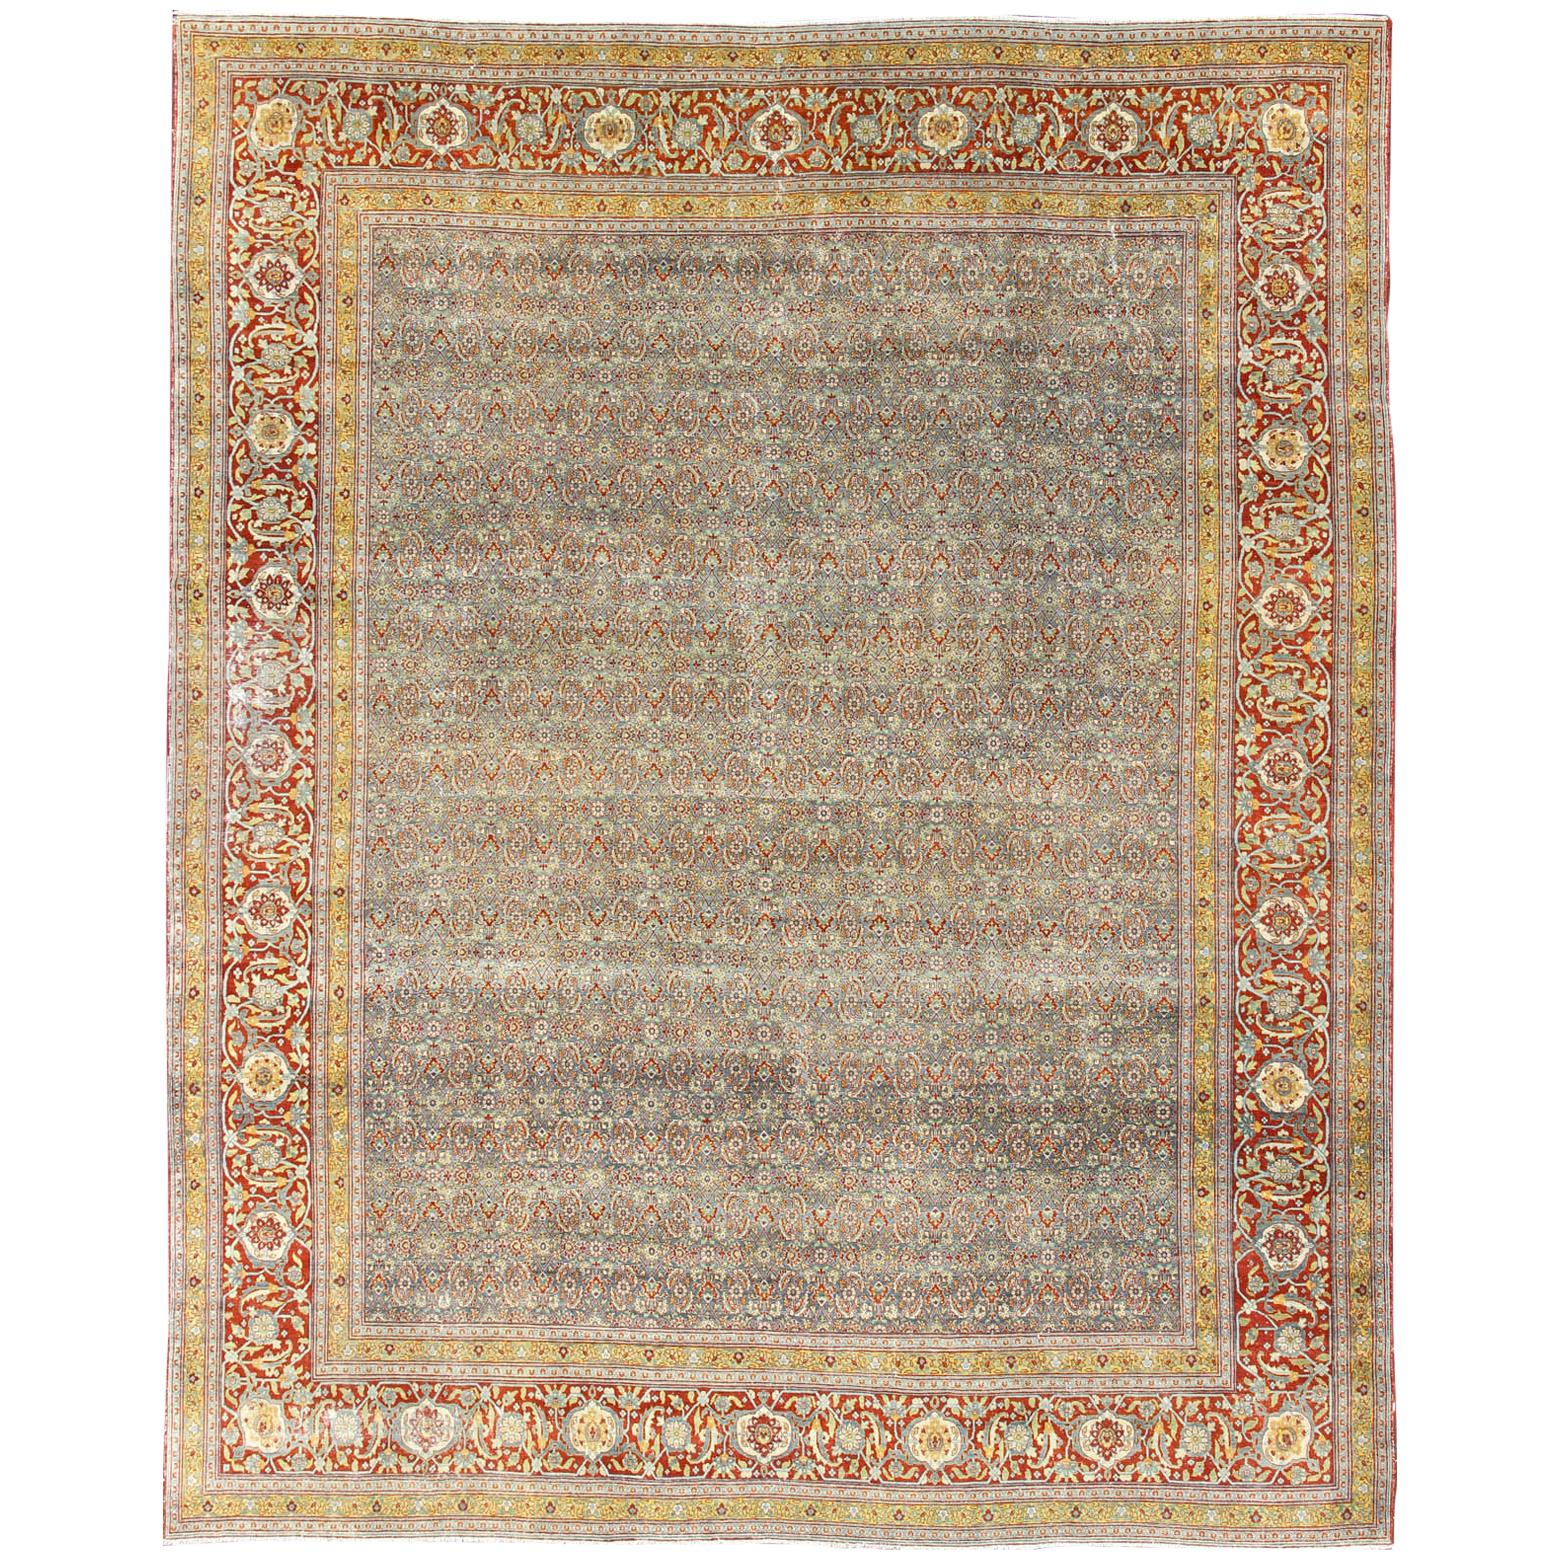 Large All-Over Geometric Antique Persian Tabriz Rug in Blue, Gray, and Red Tones For Sale